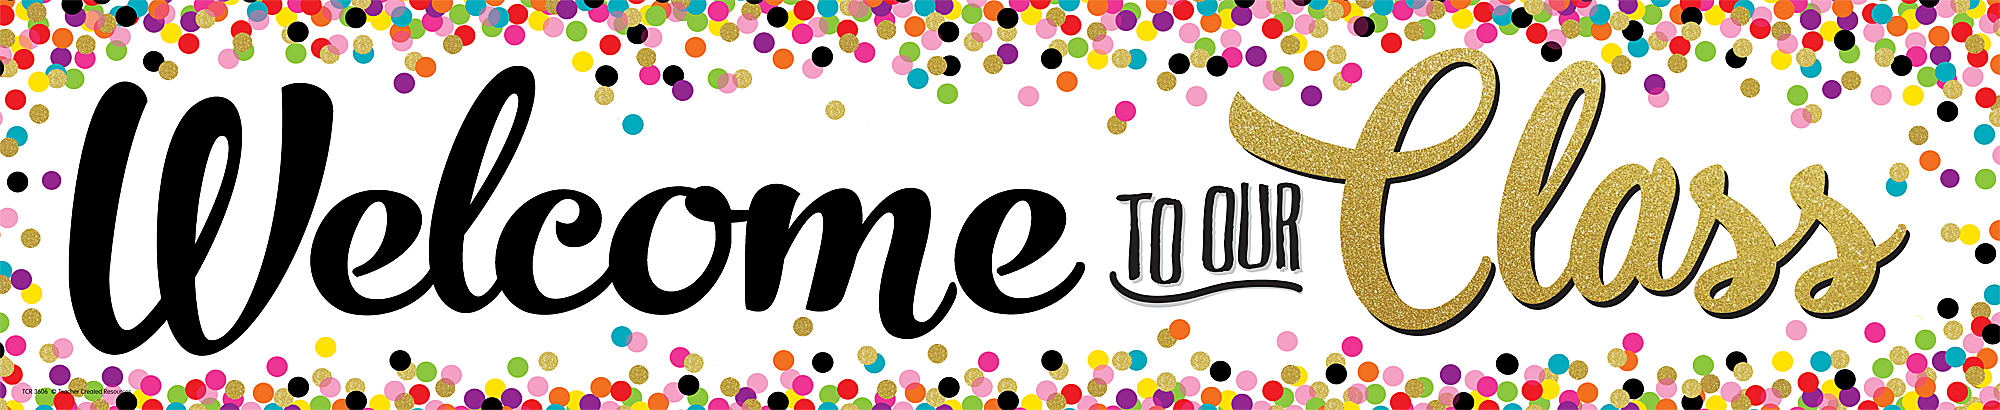 Confetti Welcome to Our Class Banner - TCR3606 | Teacher Created Resources